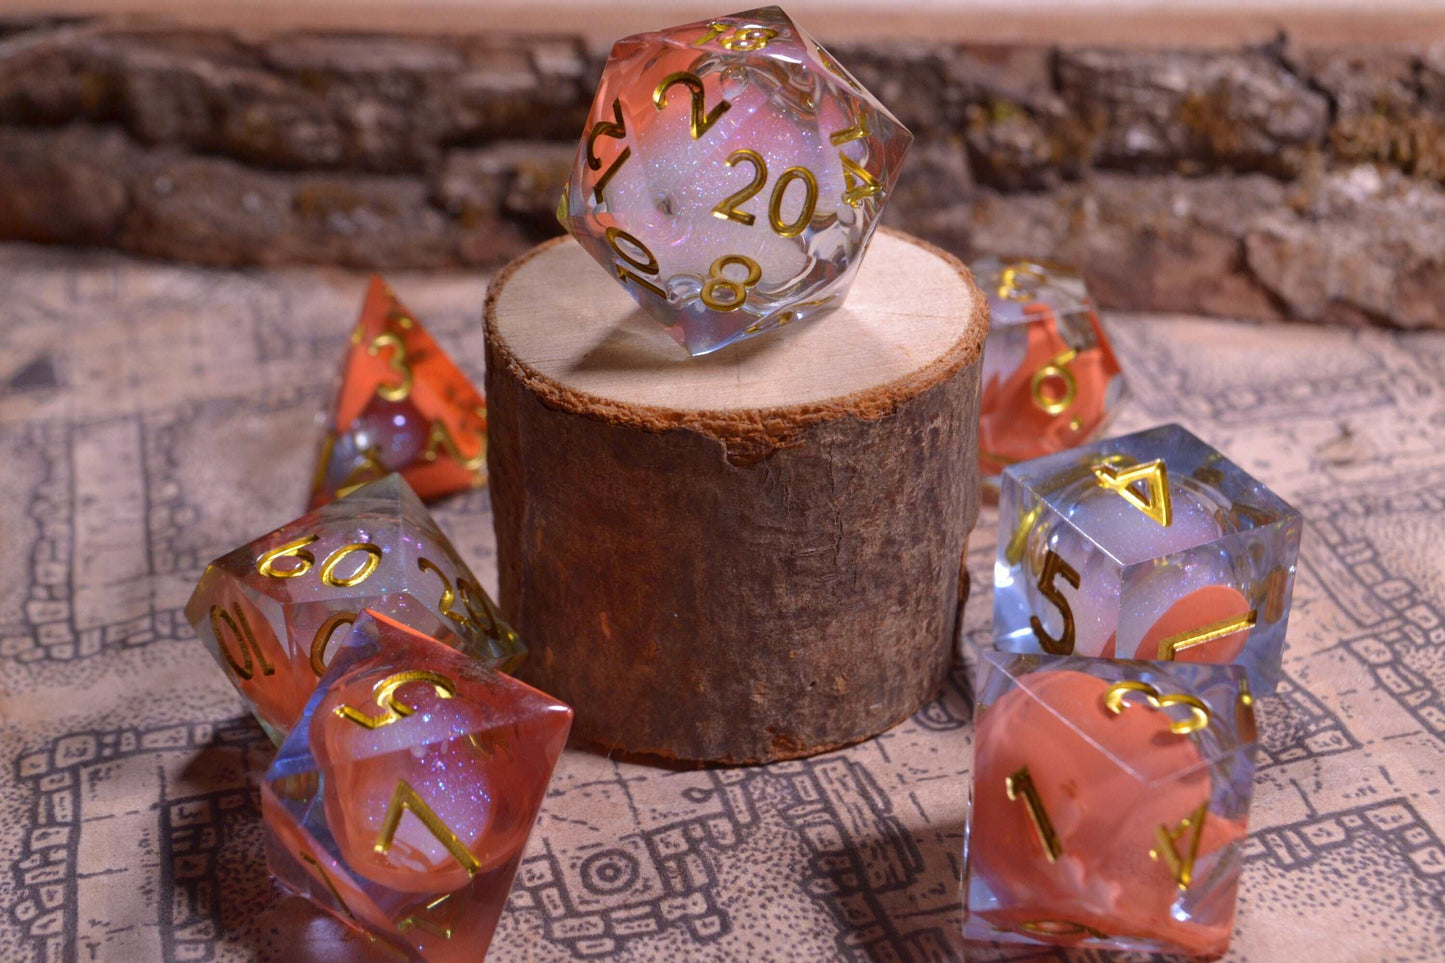 Fae Court Orange Sharp Edge Liquid Core Resin D&D Dice Set With Metallic Gold Numbering - For Dungeons and Dragons - Gift Set